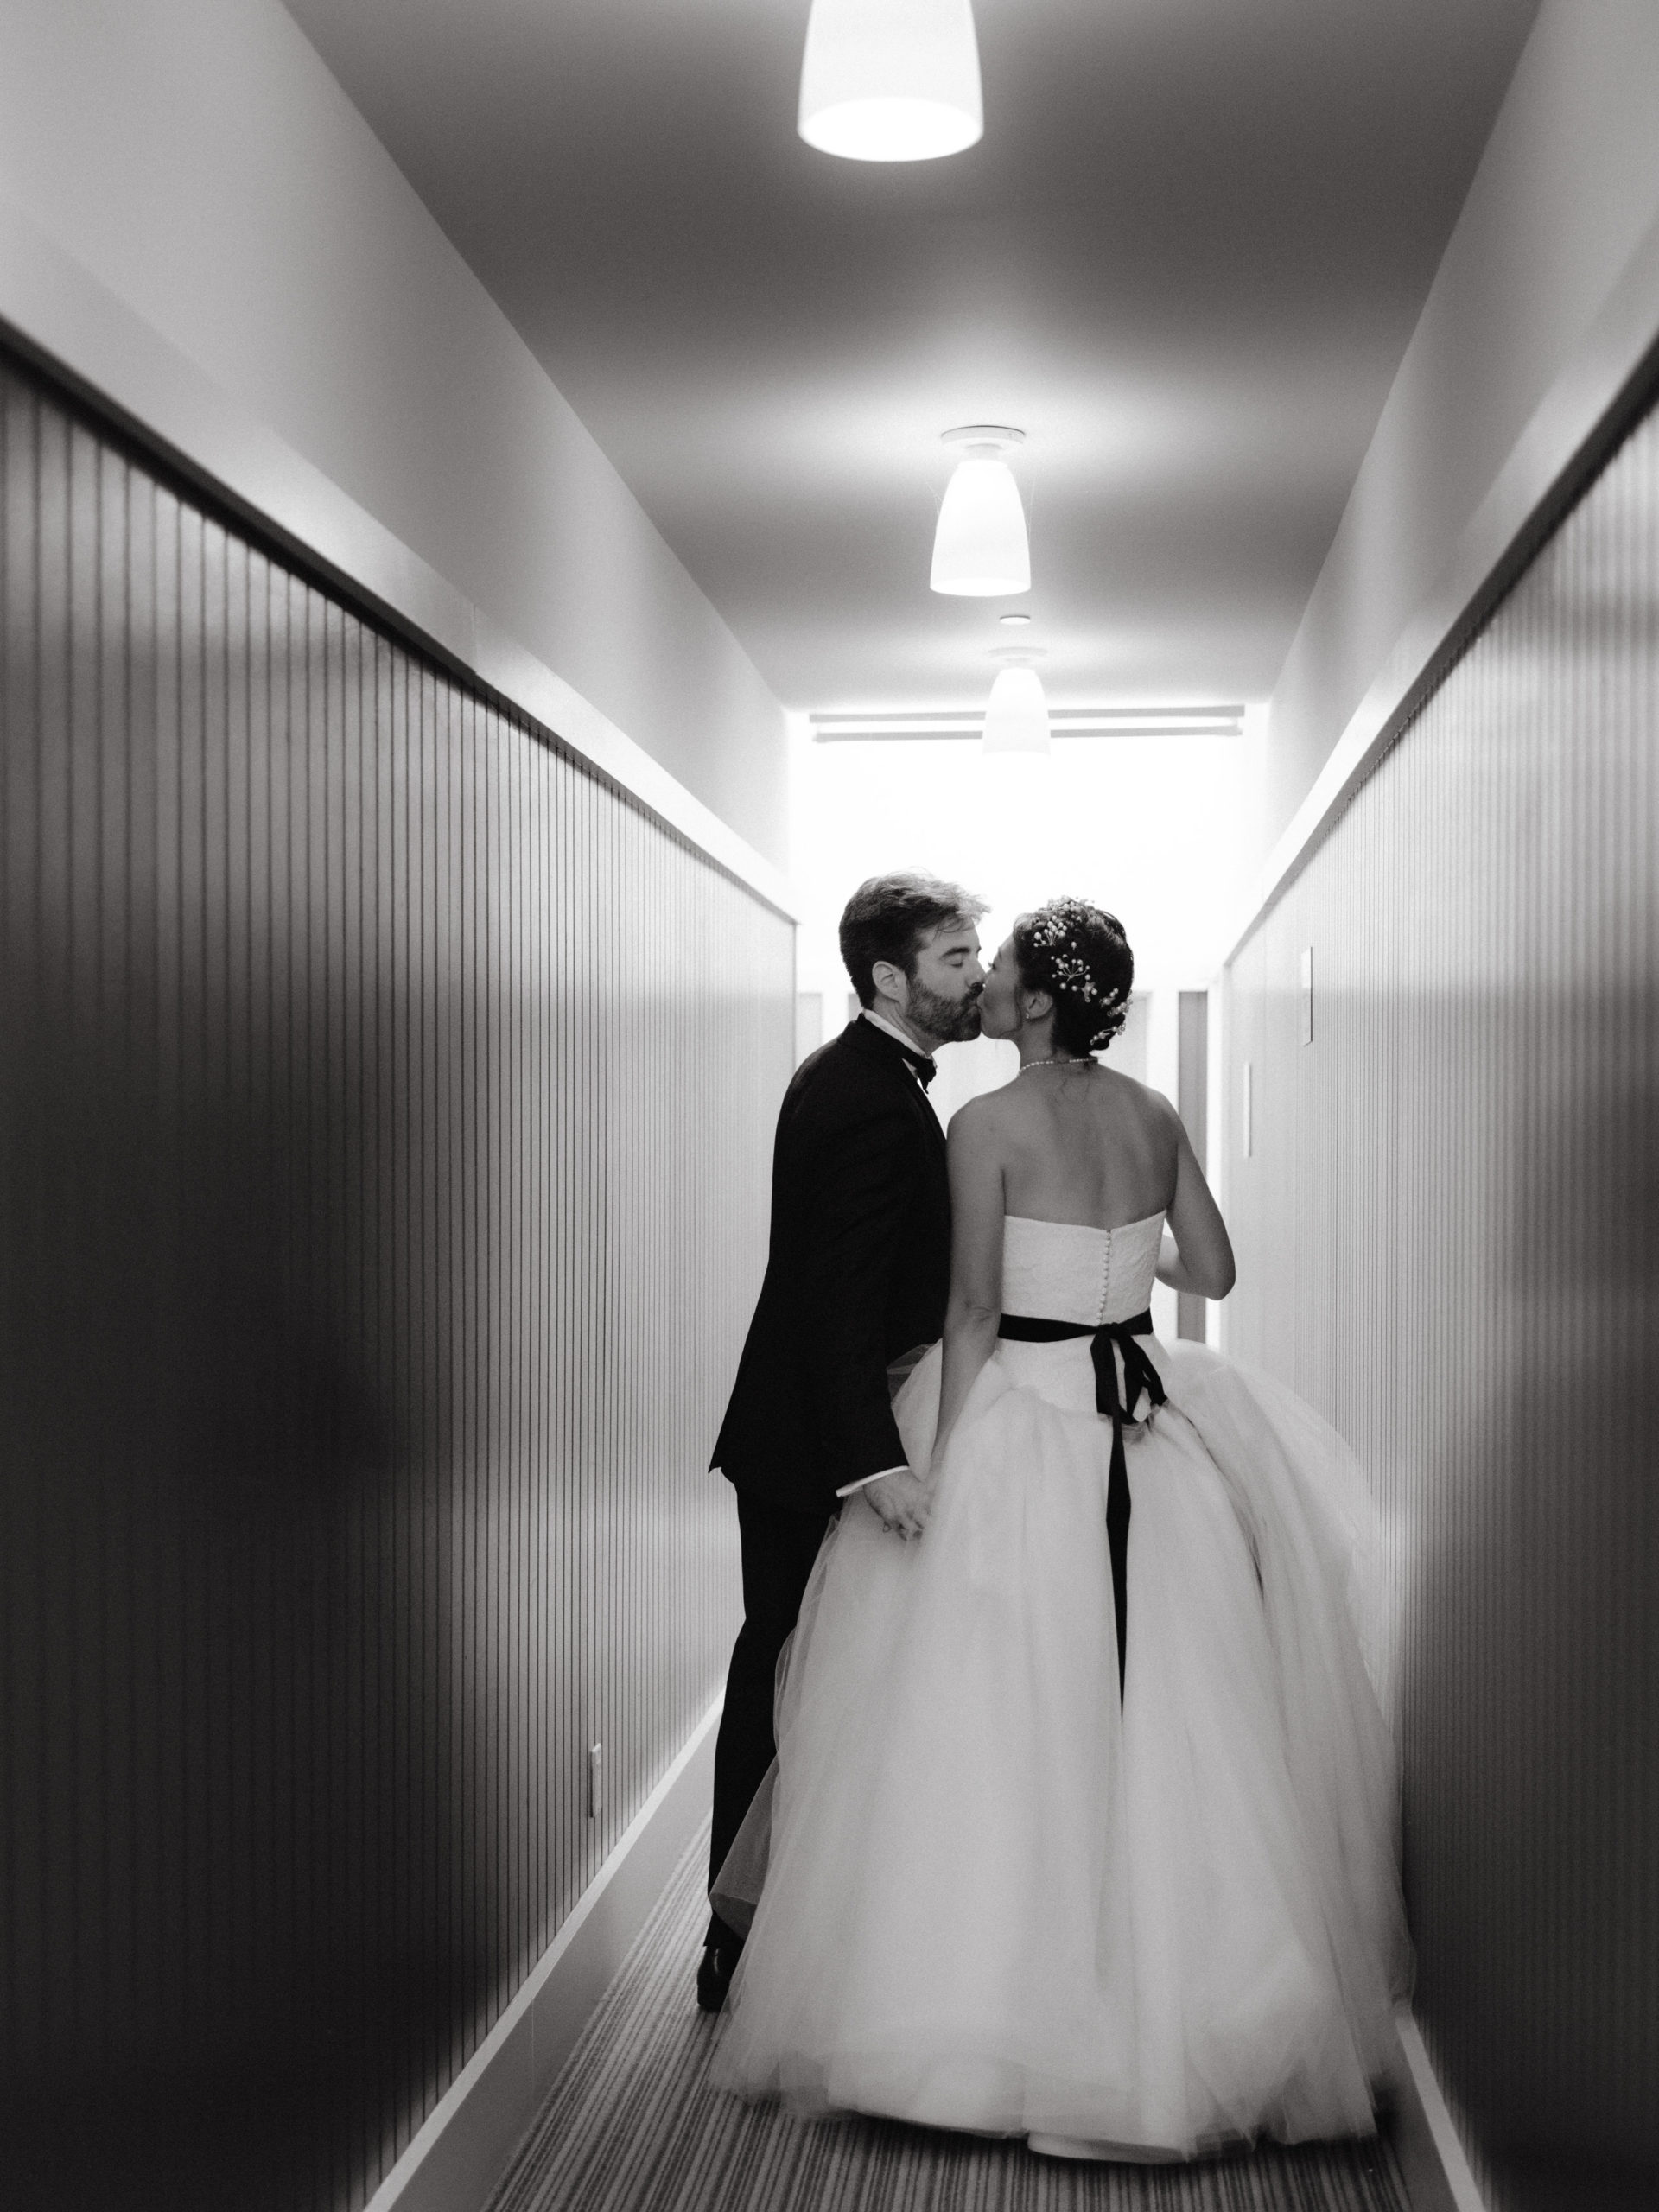 A black and white photo of the bride and groom kissing on a hallway. Destination wedding rules image by Jenny Fu Studio